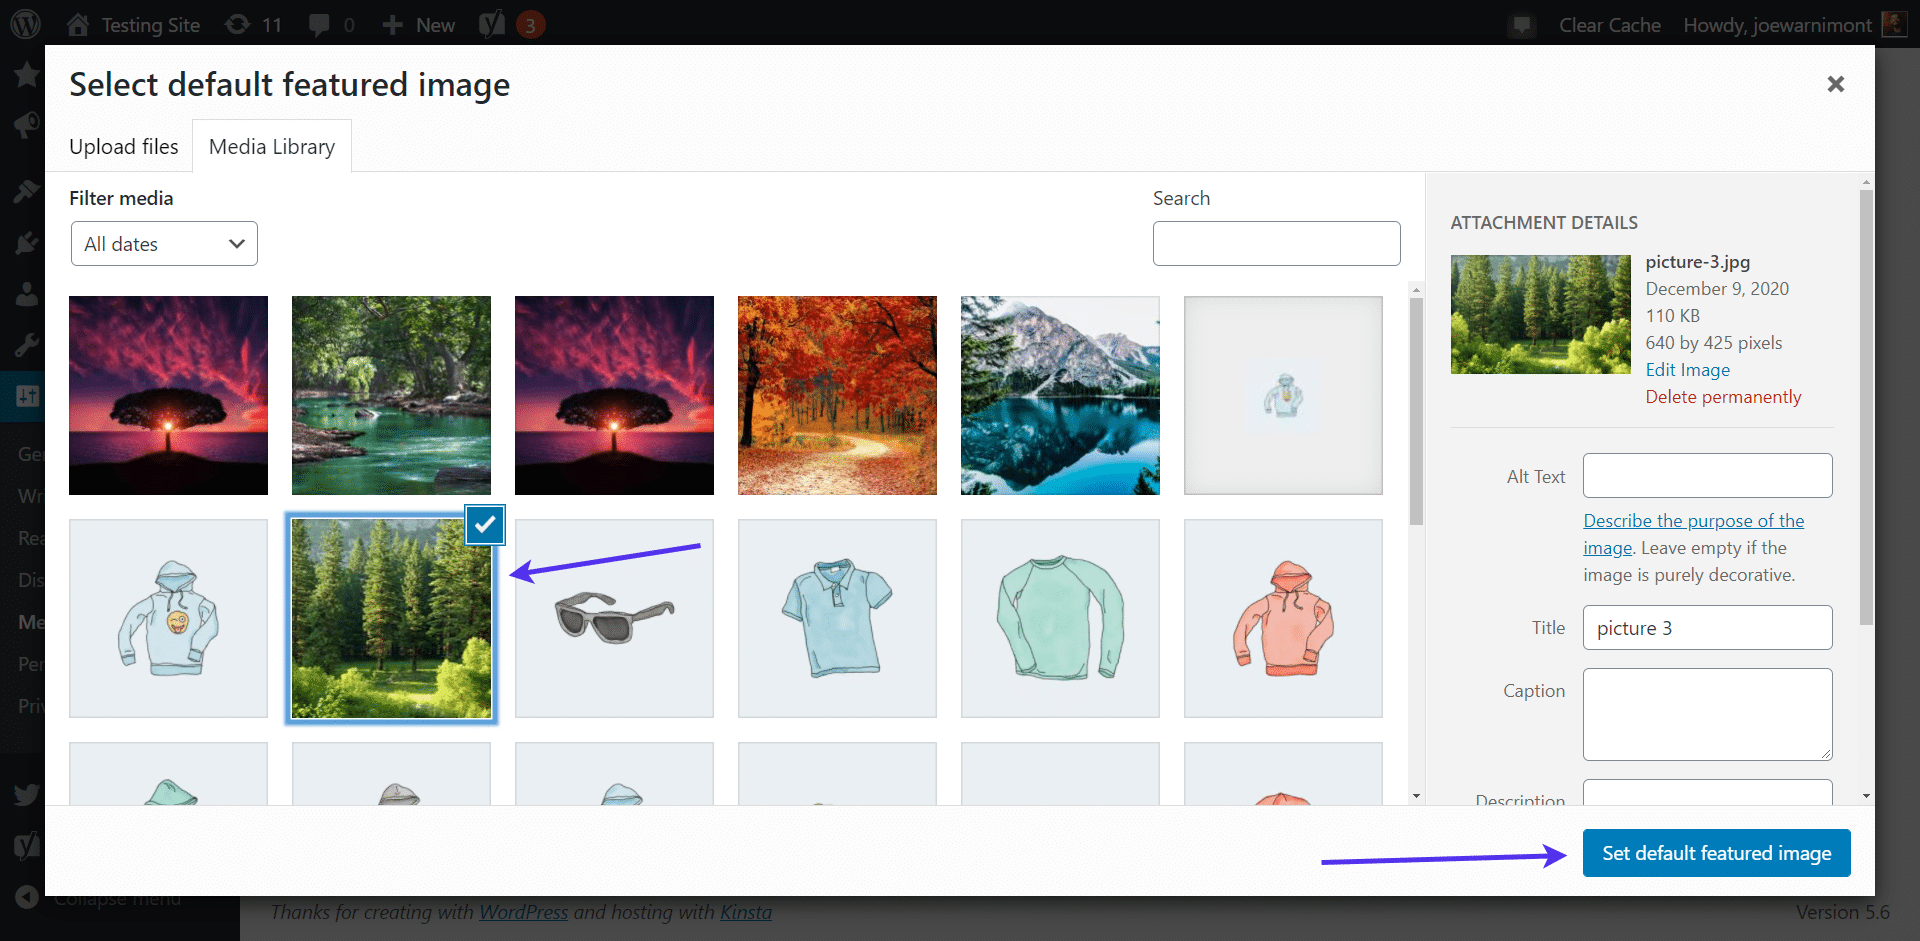 Select the default featured image 